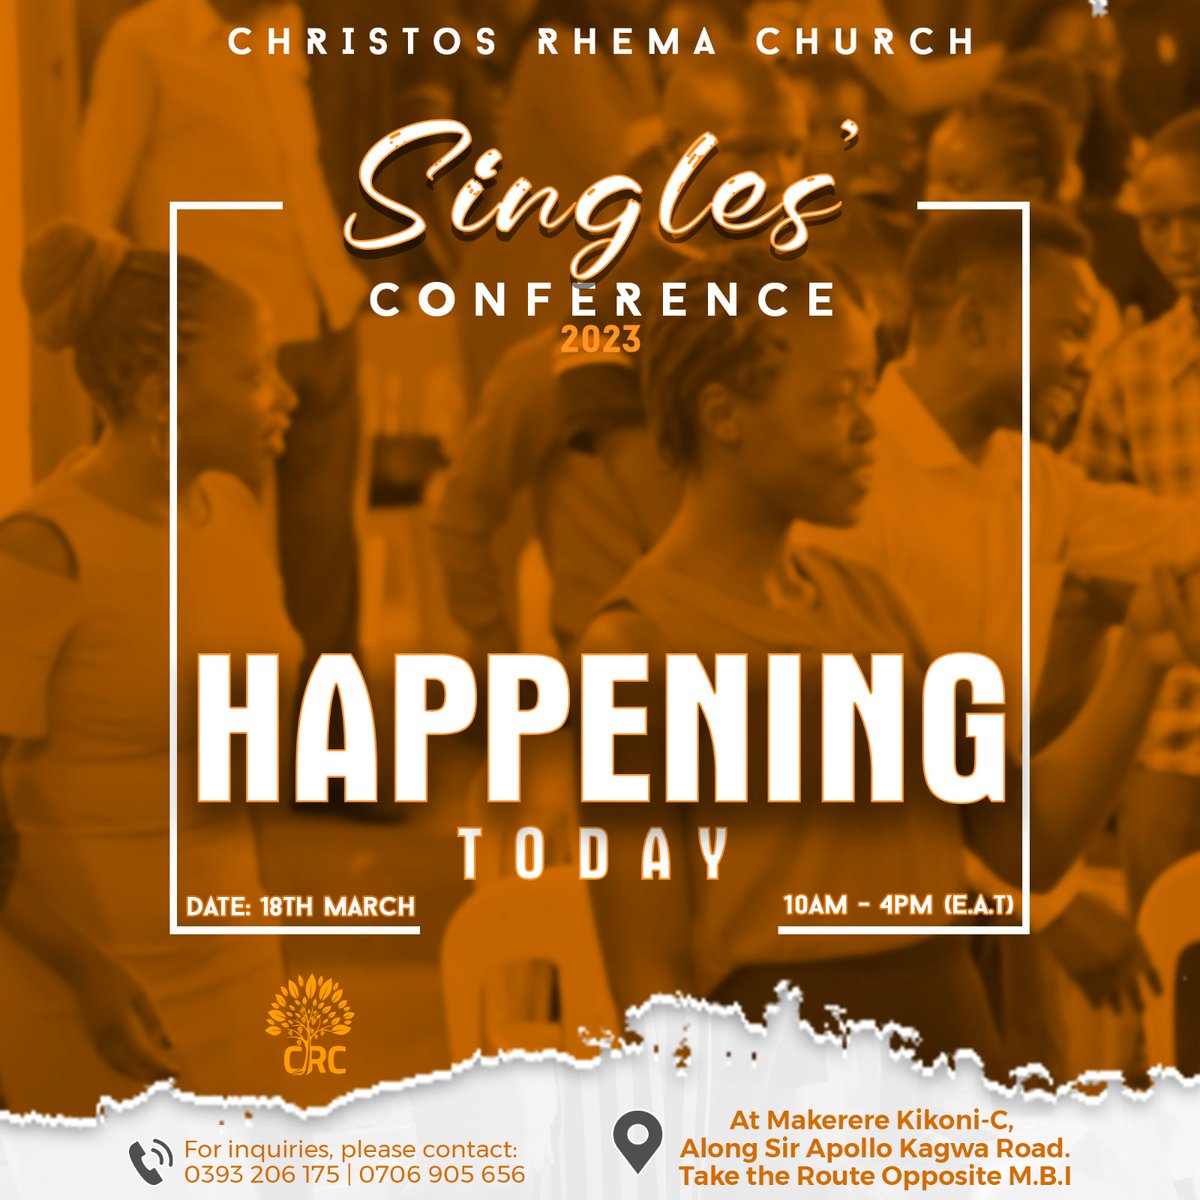 SINGLES' CONFERENCE 
Final session 

youtube.com/live/H1pcoHPRj…

Share with all your friends

#SpreadingtheWord
#GreatGlory